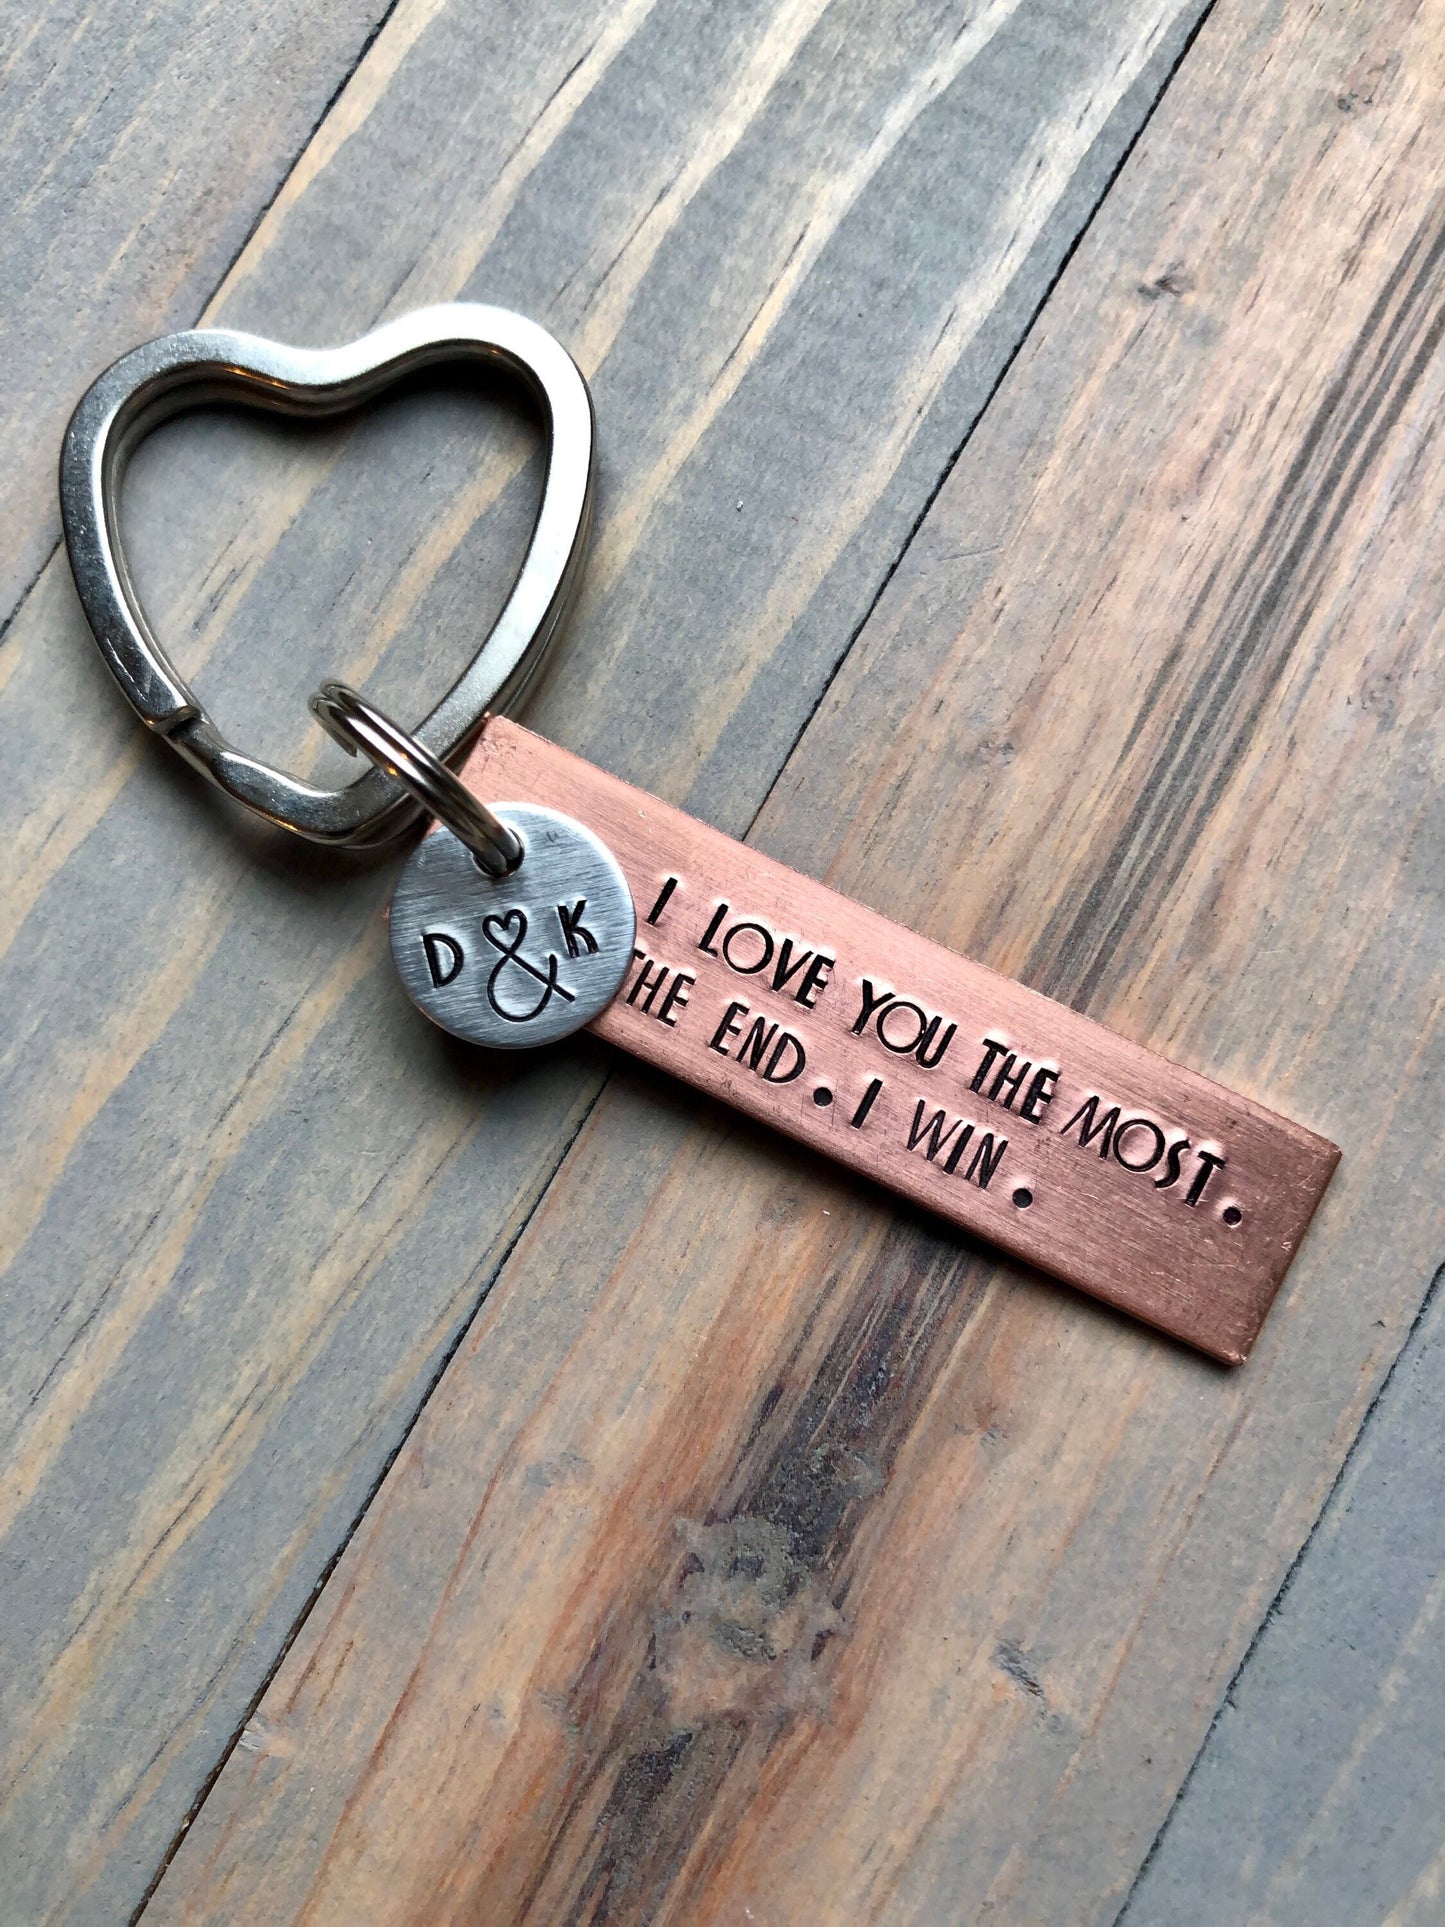 I Love You More Keychain Cute Gift for Boyfriend Gift for 